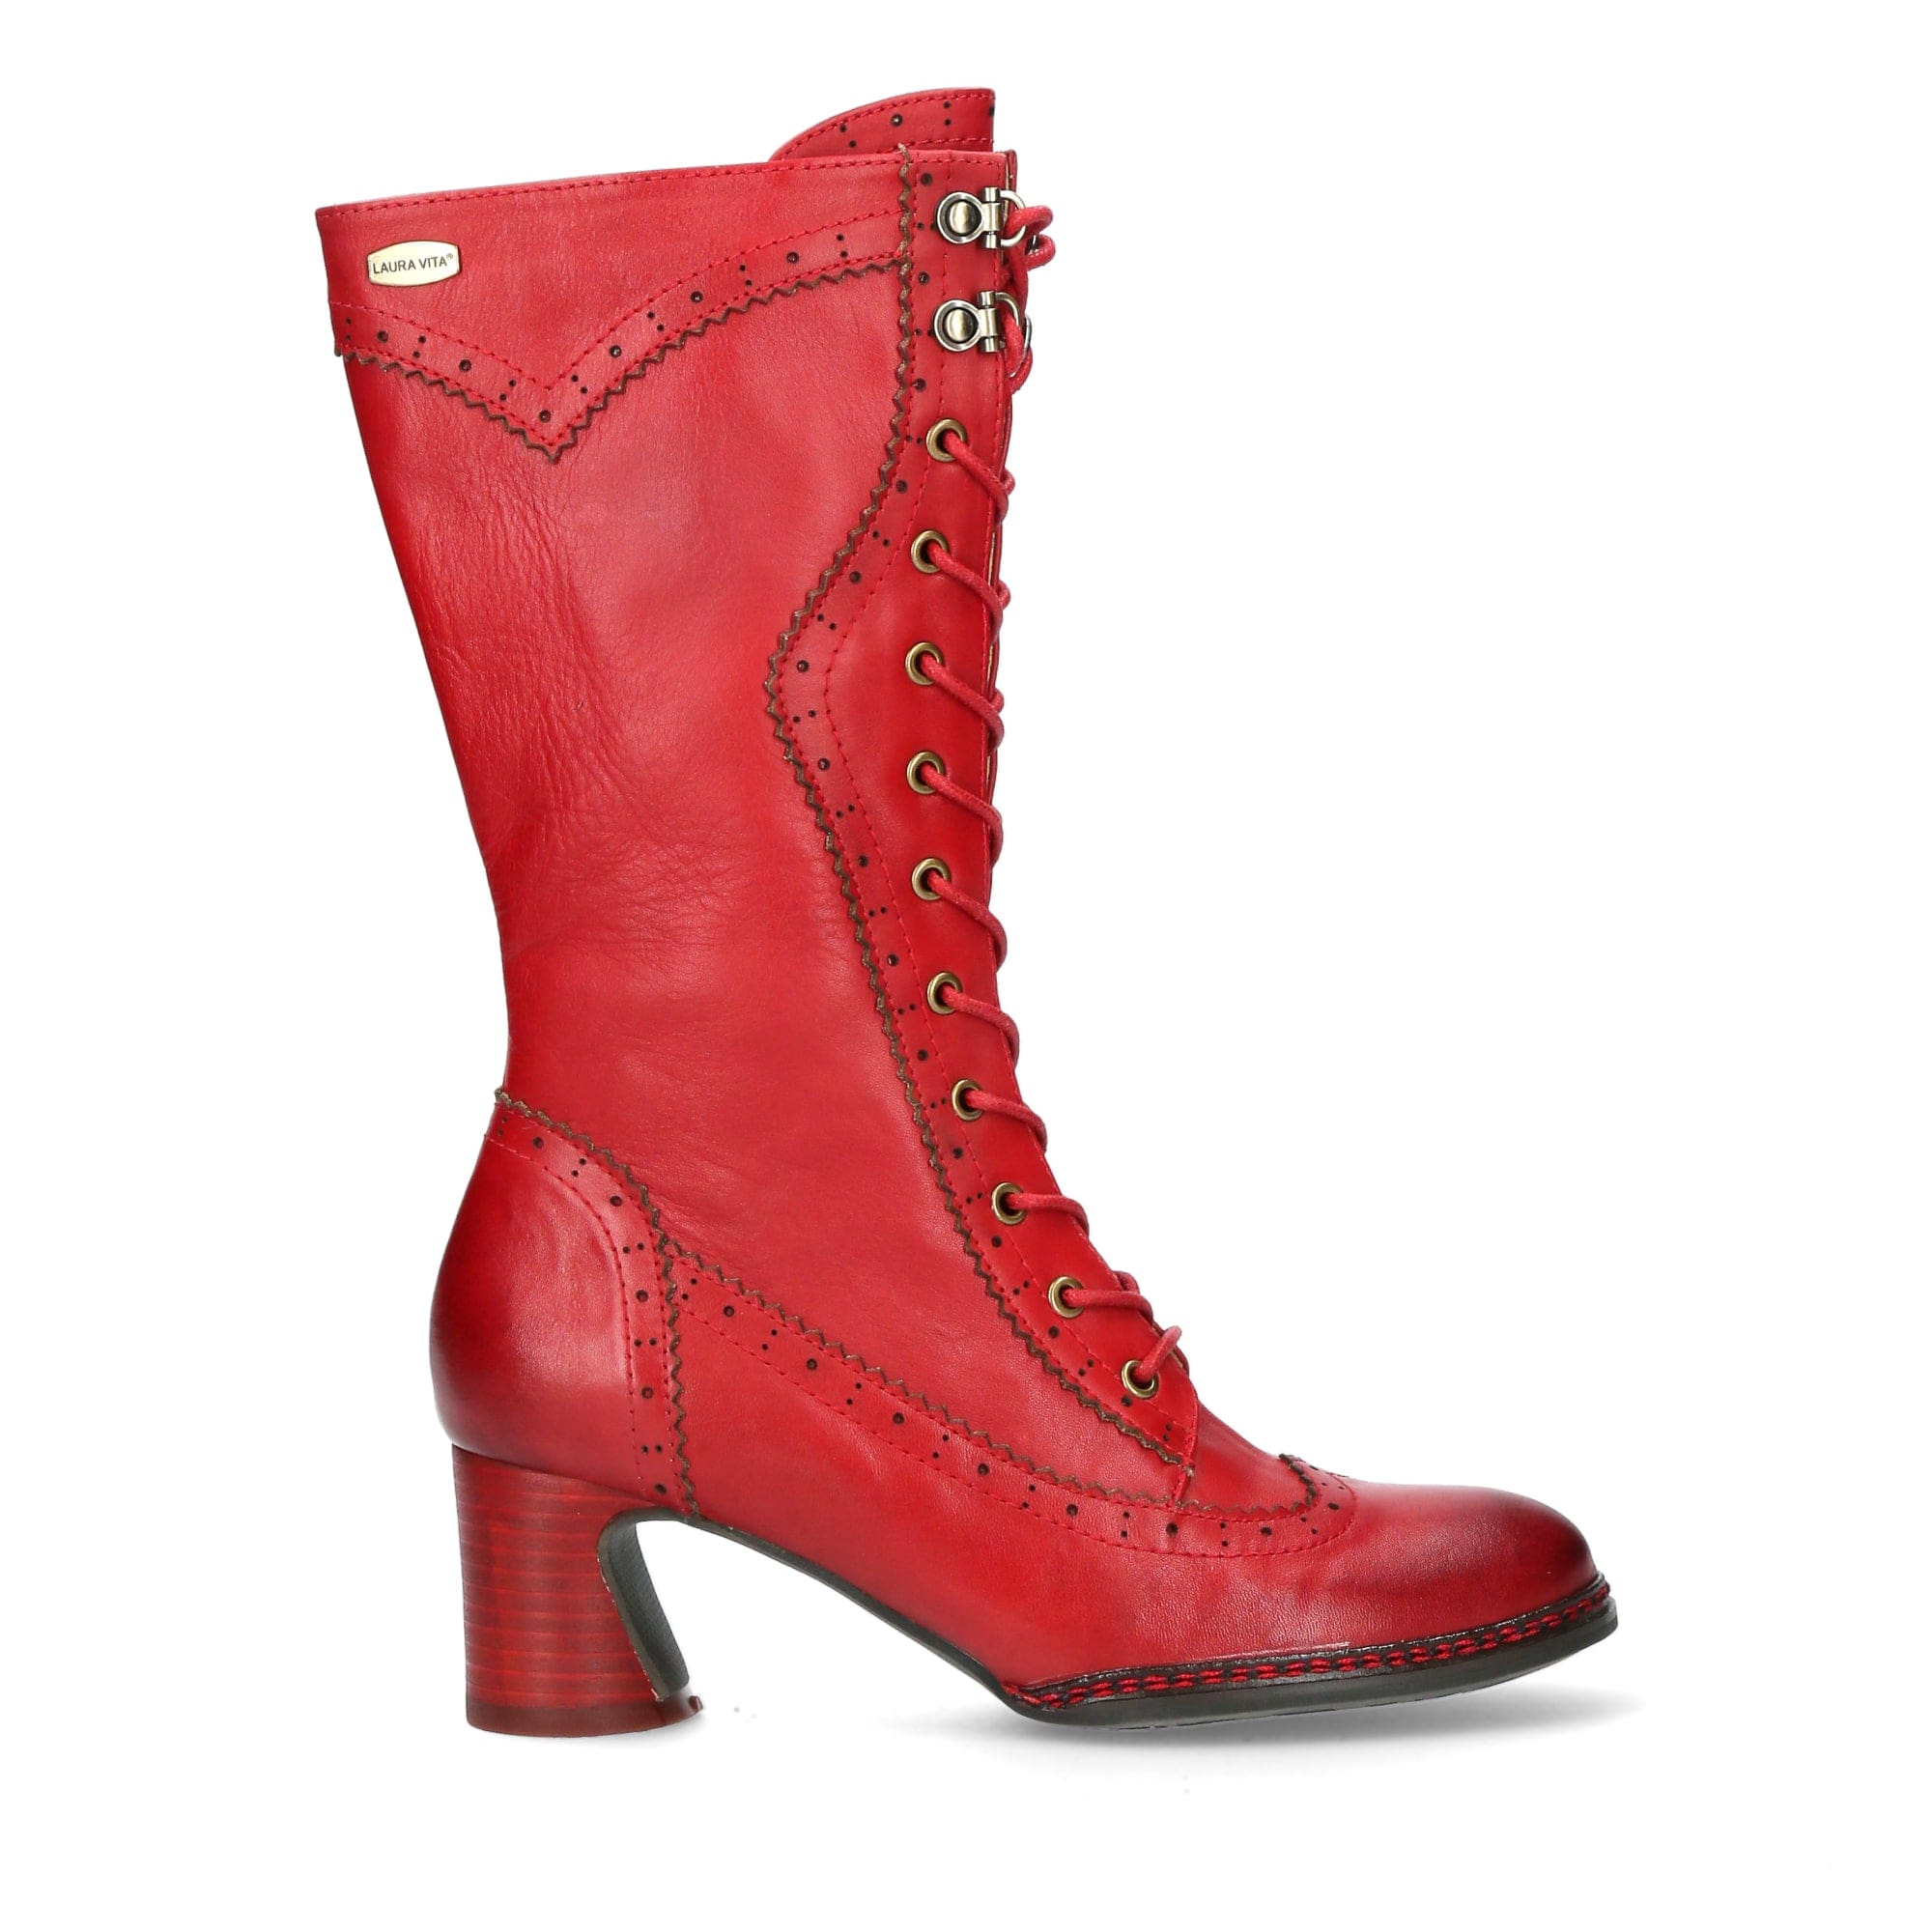 Schuh INCAO 06A - 36 / Rot - Stiefel